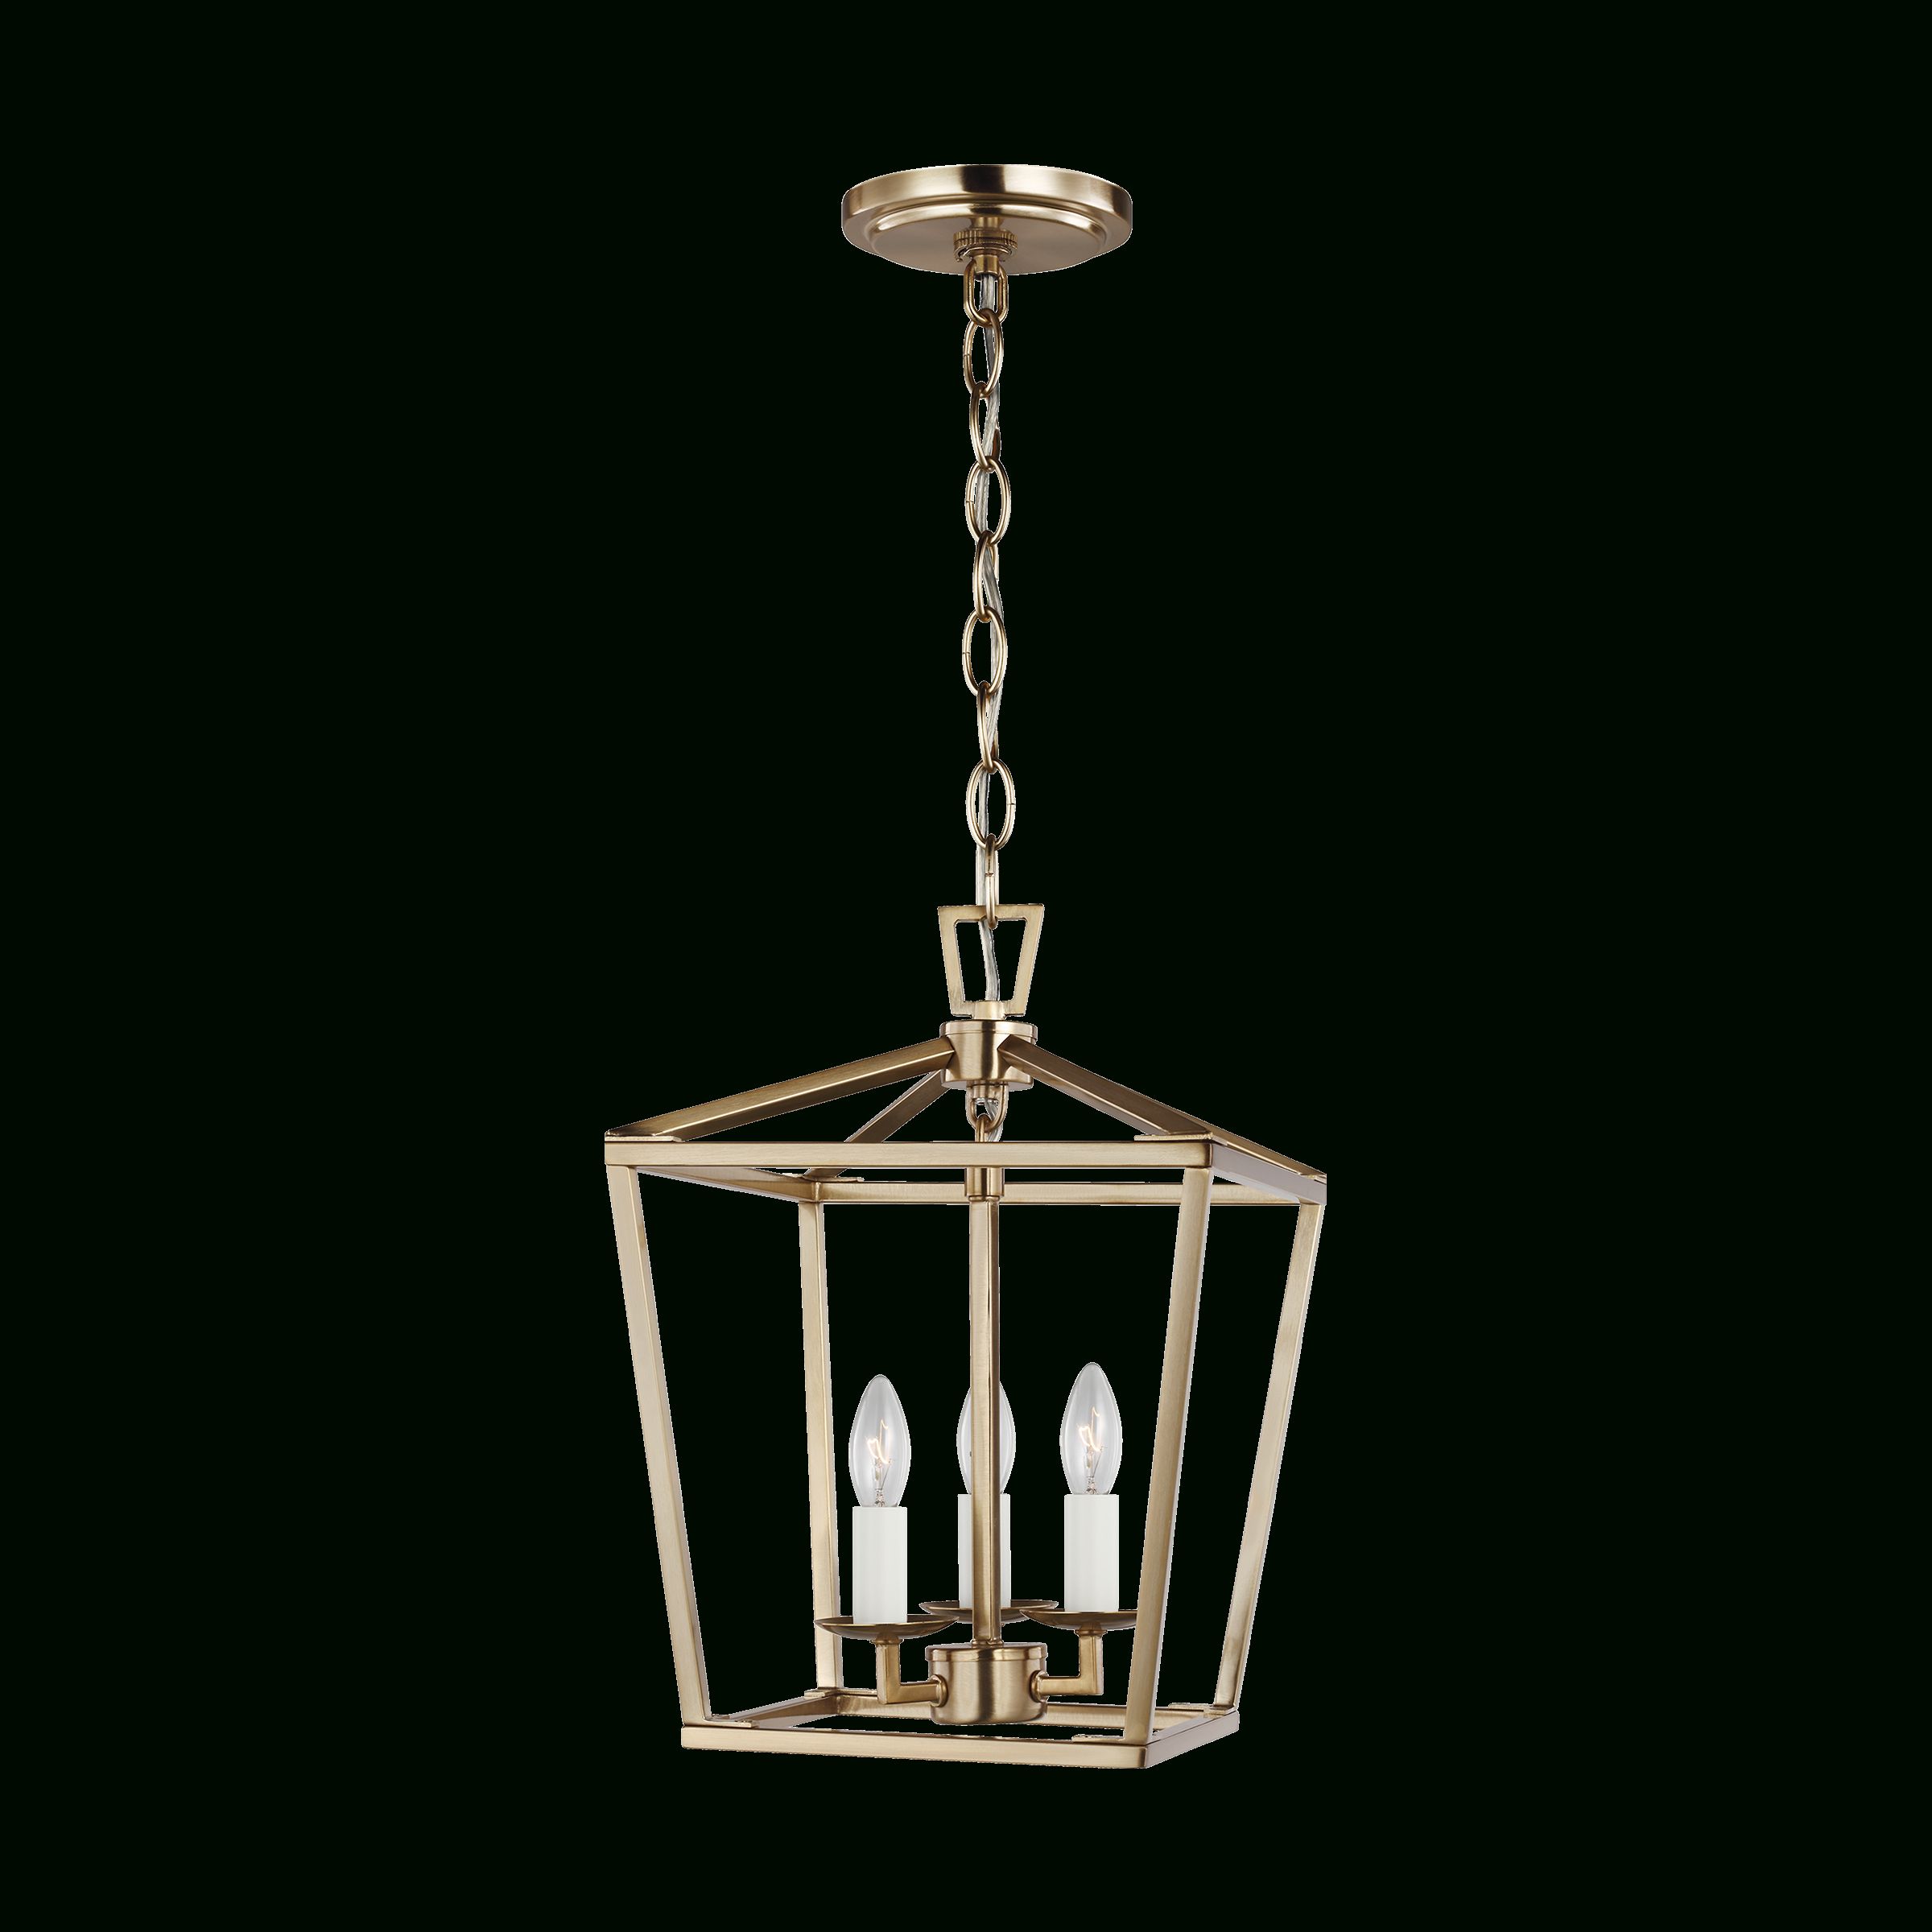 Brass Lantern Pendant Lighting At Lowes Inside Brass Wrapped Lantern Chandeliers (View 9 of 15)